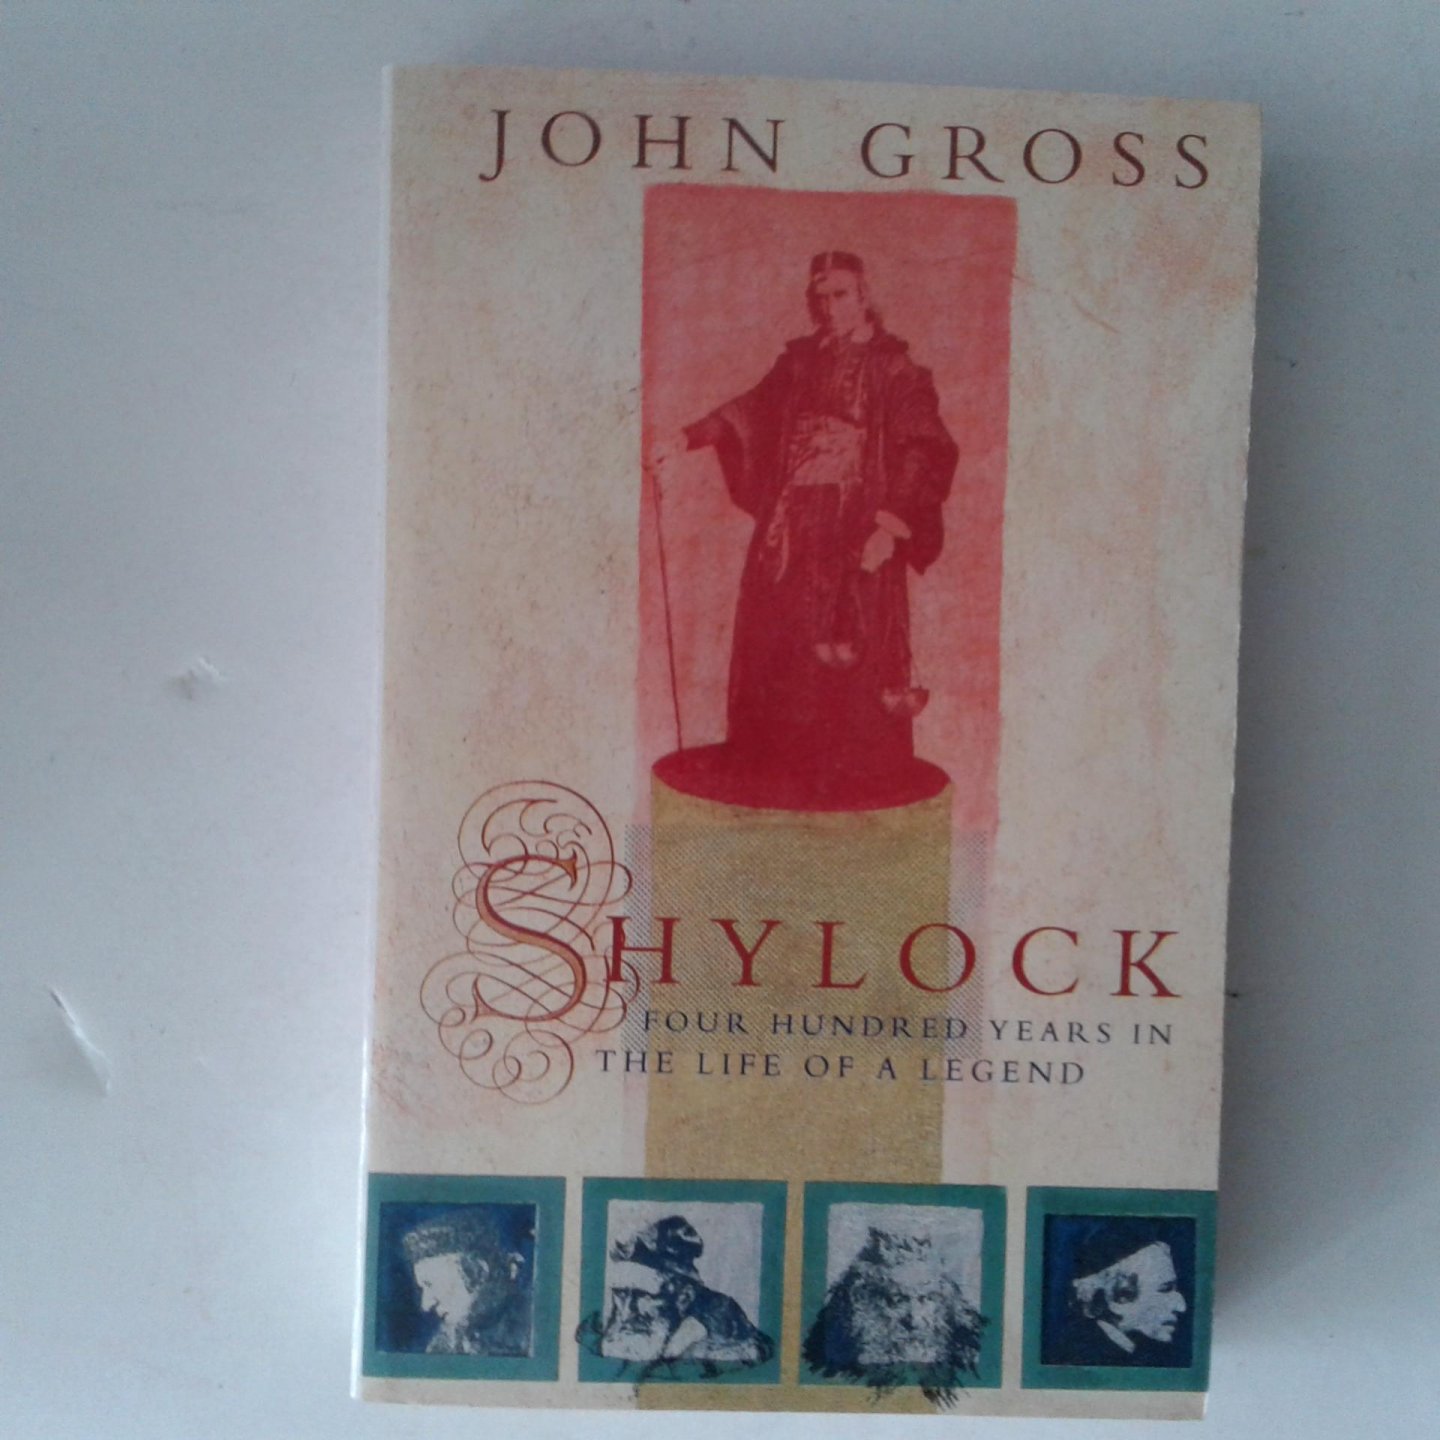 Grosx, John - Shylock ; Four Hundred Years in the Life of a Legend